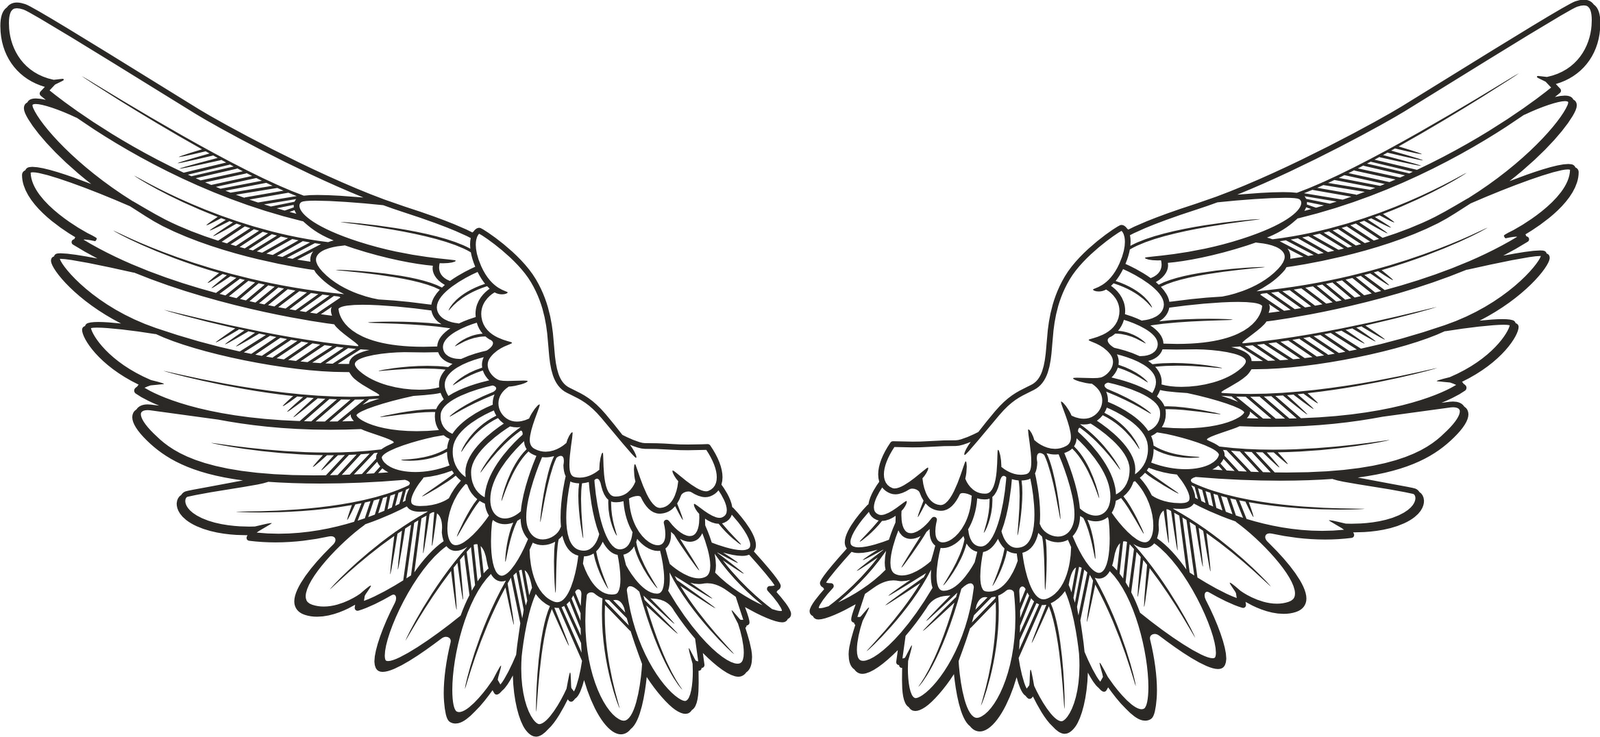 Free Bird Wing Png Download Free Clip Art Free Clip Art On Clipart Library,Cooking Ribs On Gas Grill With Wood Chips